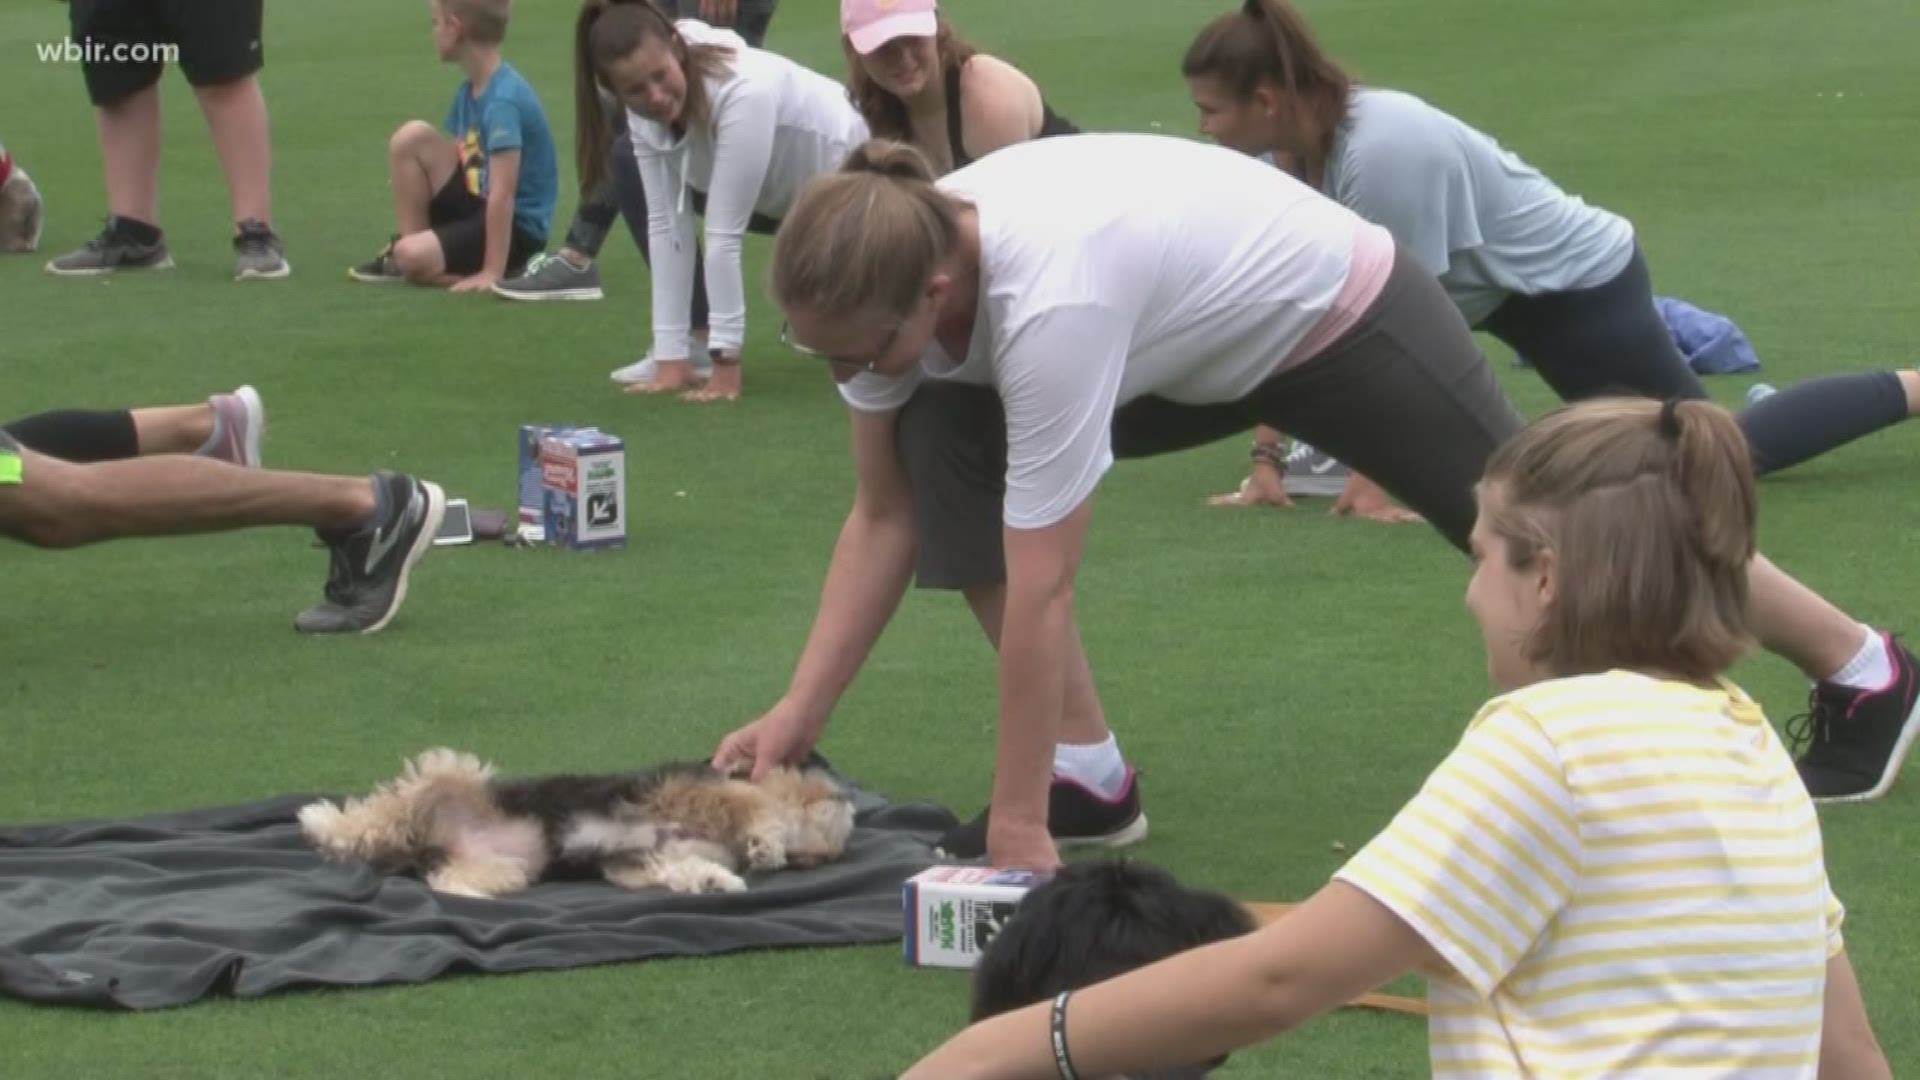 Smokies Baseball hosted a puppy yoga event today on the field so fans could relax without a RUFF time.